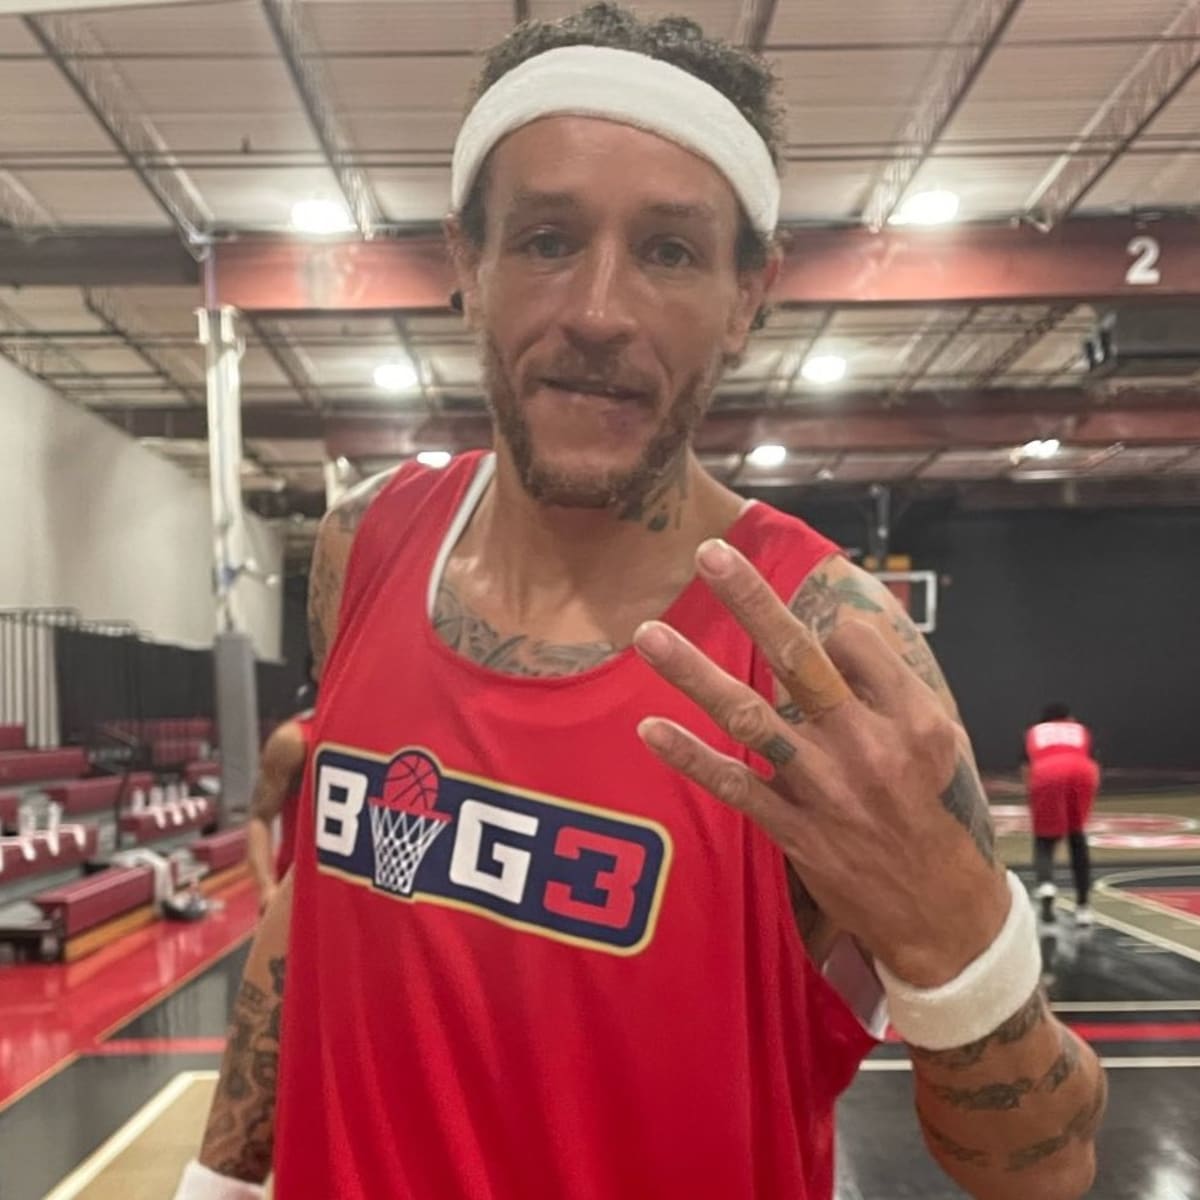 WATCH: Delonte West, Ex Mavs & NBA Standout, Trying for Big3